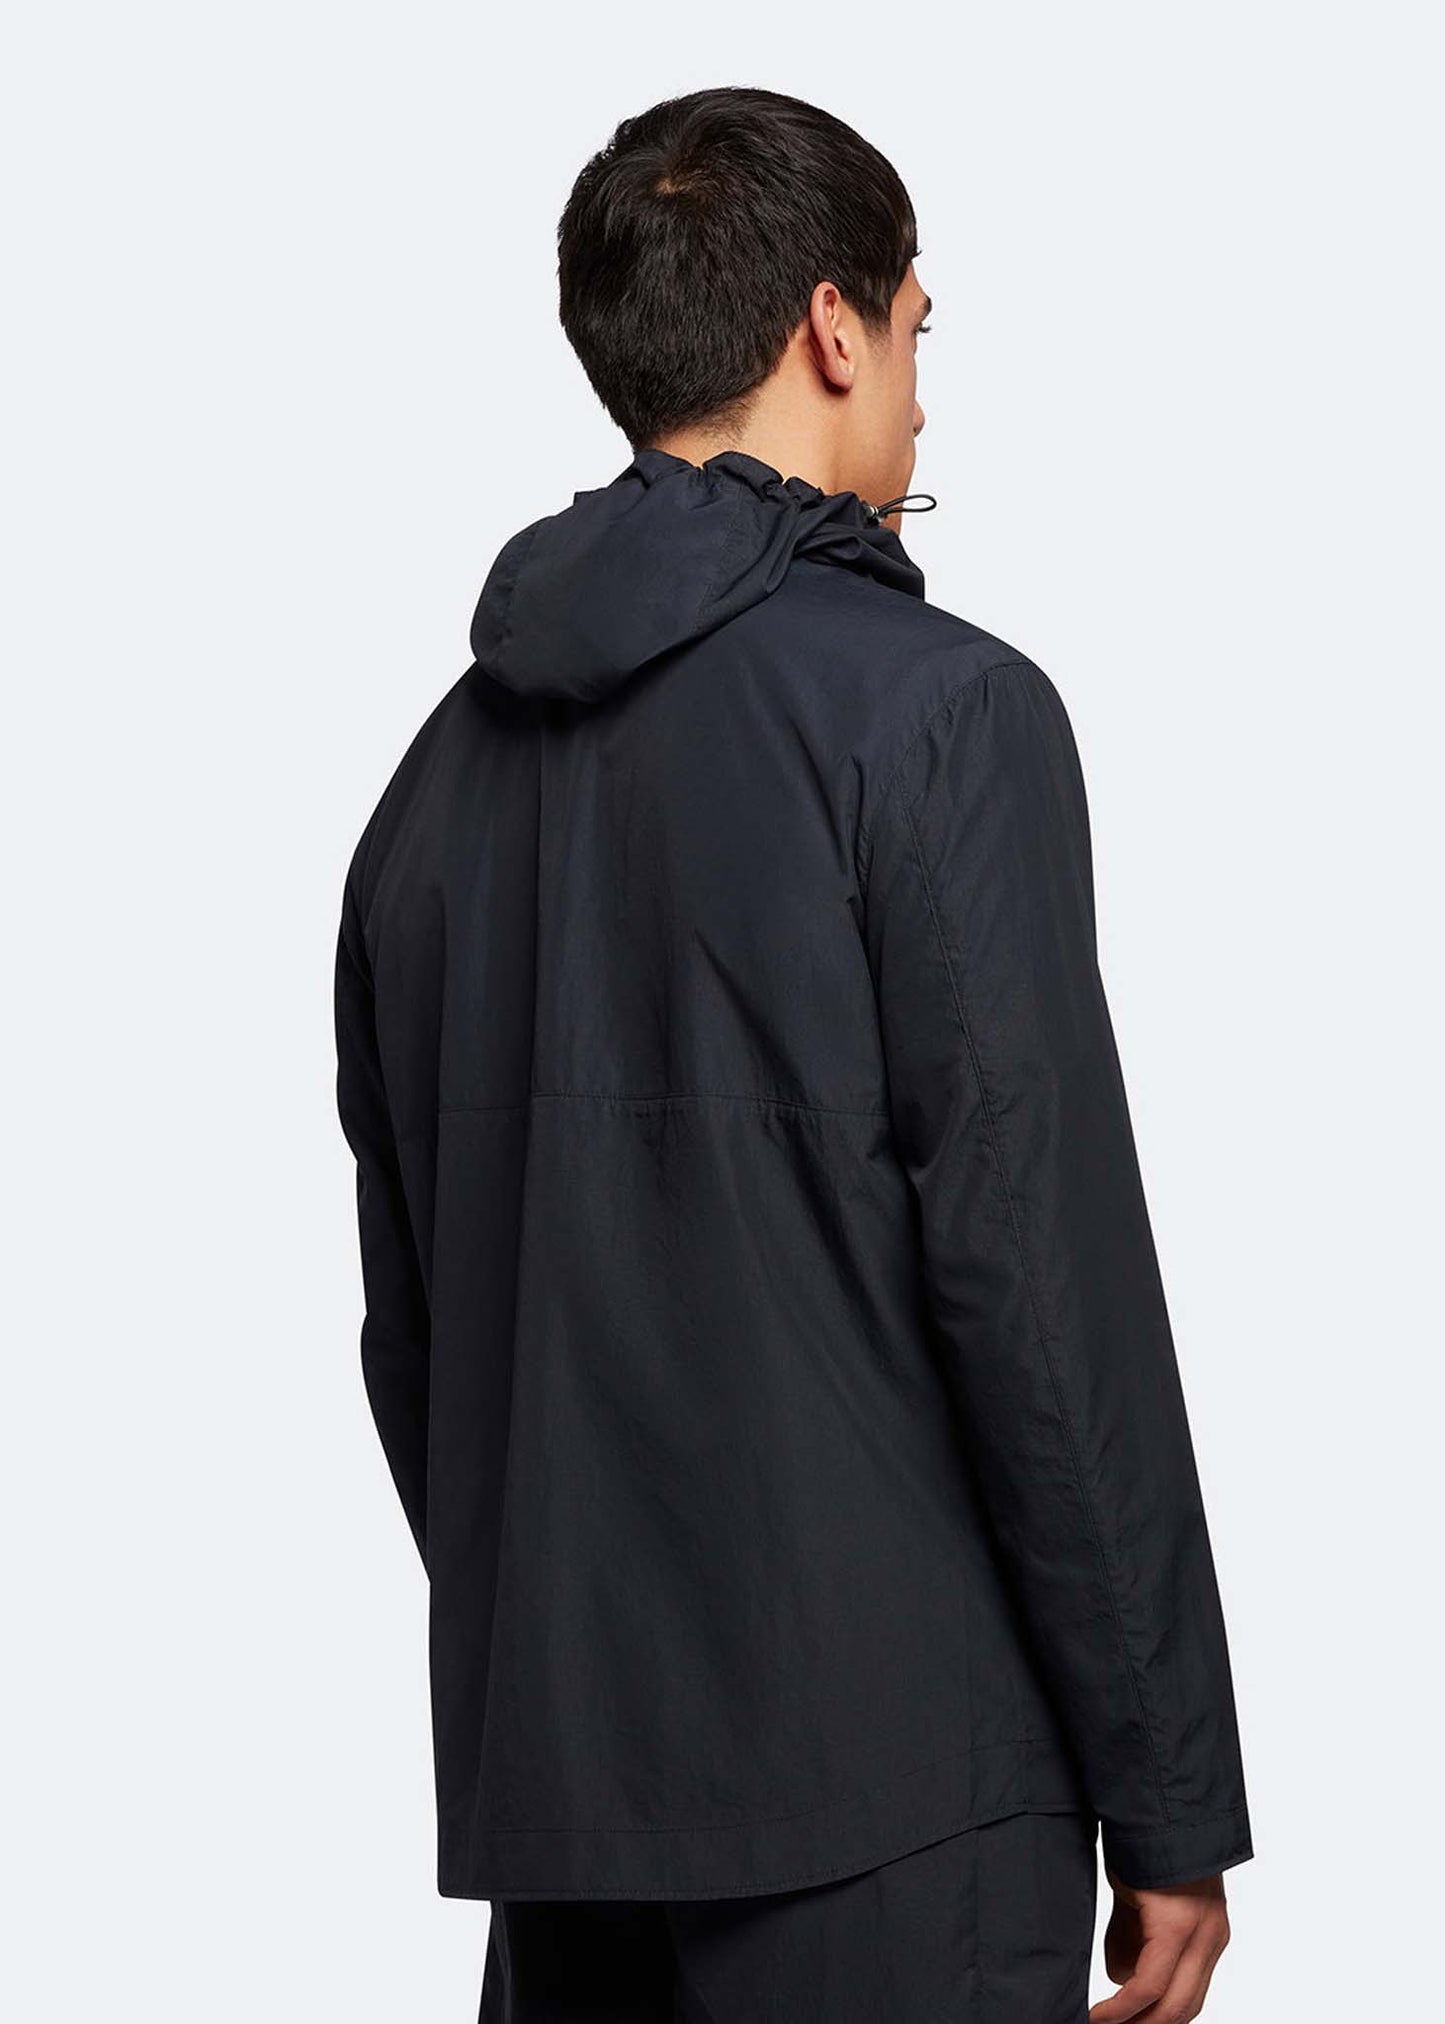 Hooded overhead jacket - lacquer